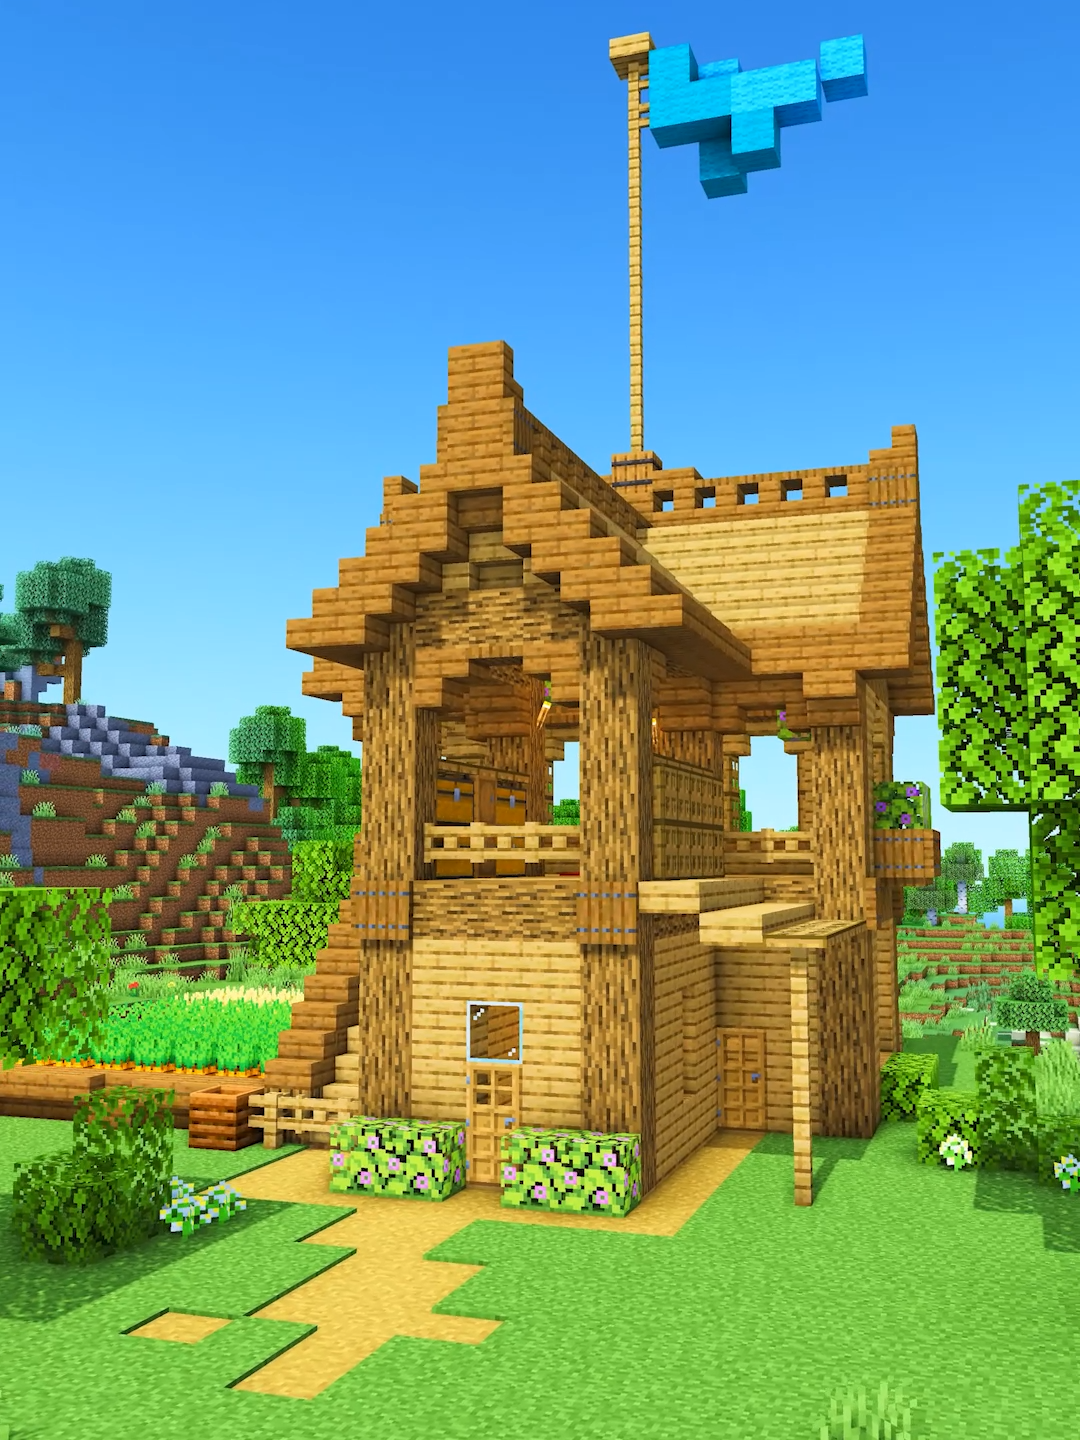 Build it! (Starter House 21) - link in bio! The 3D Guide is online and has a materials list included. No mods or addons are required! 📥Included downloads: Java / Bedrock world and Schematic. #Minecraft#charliecustardbuilds